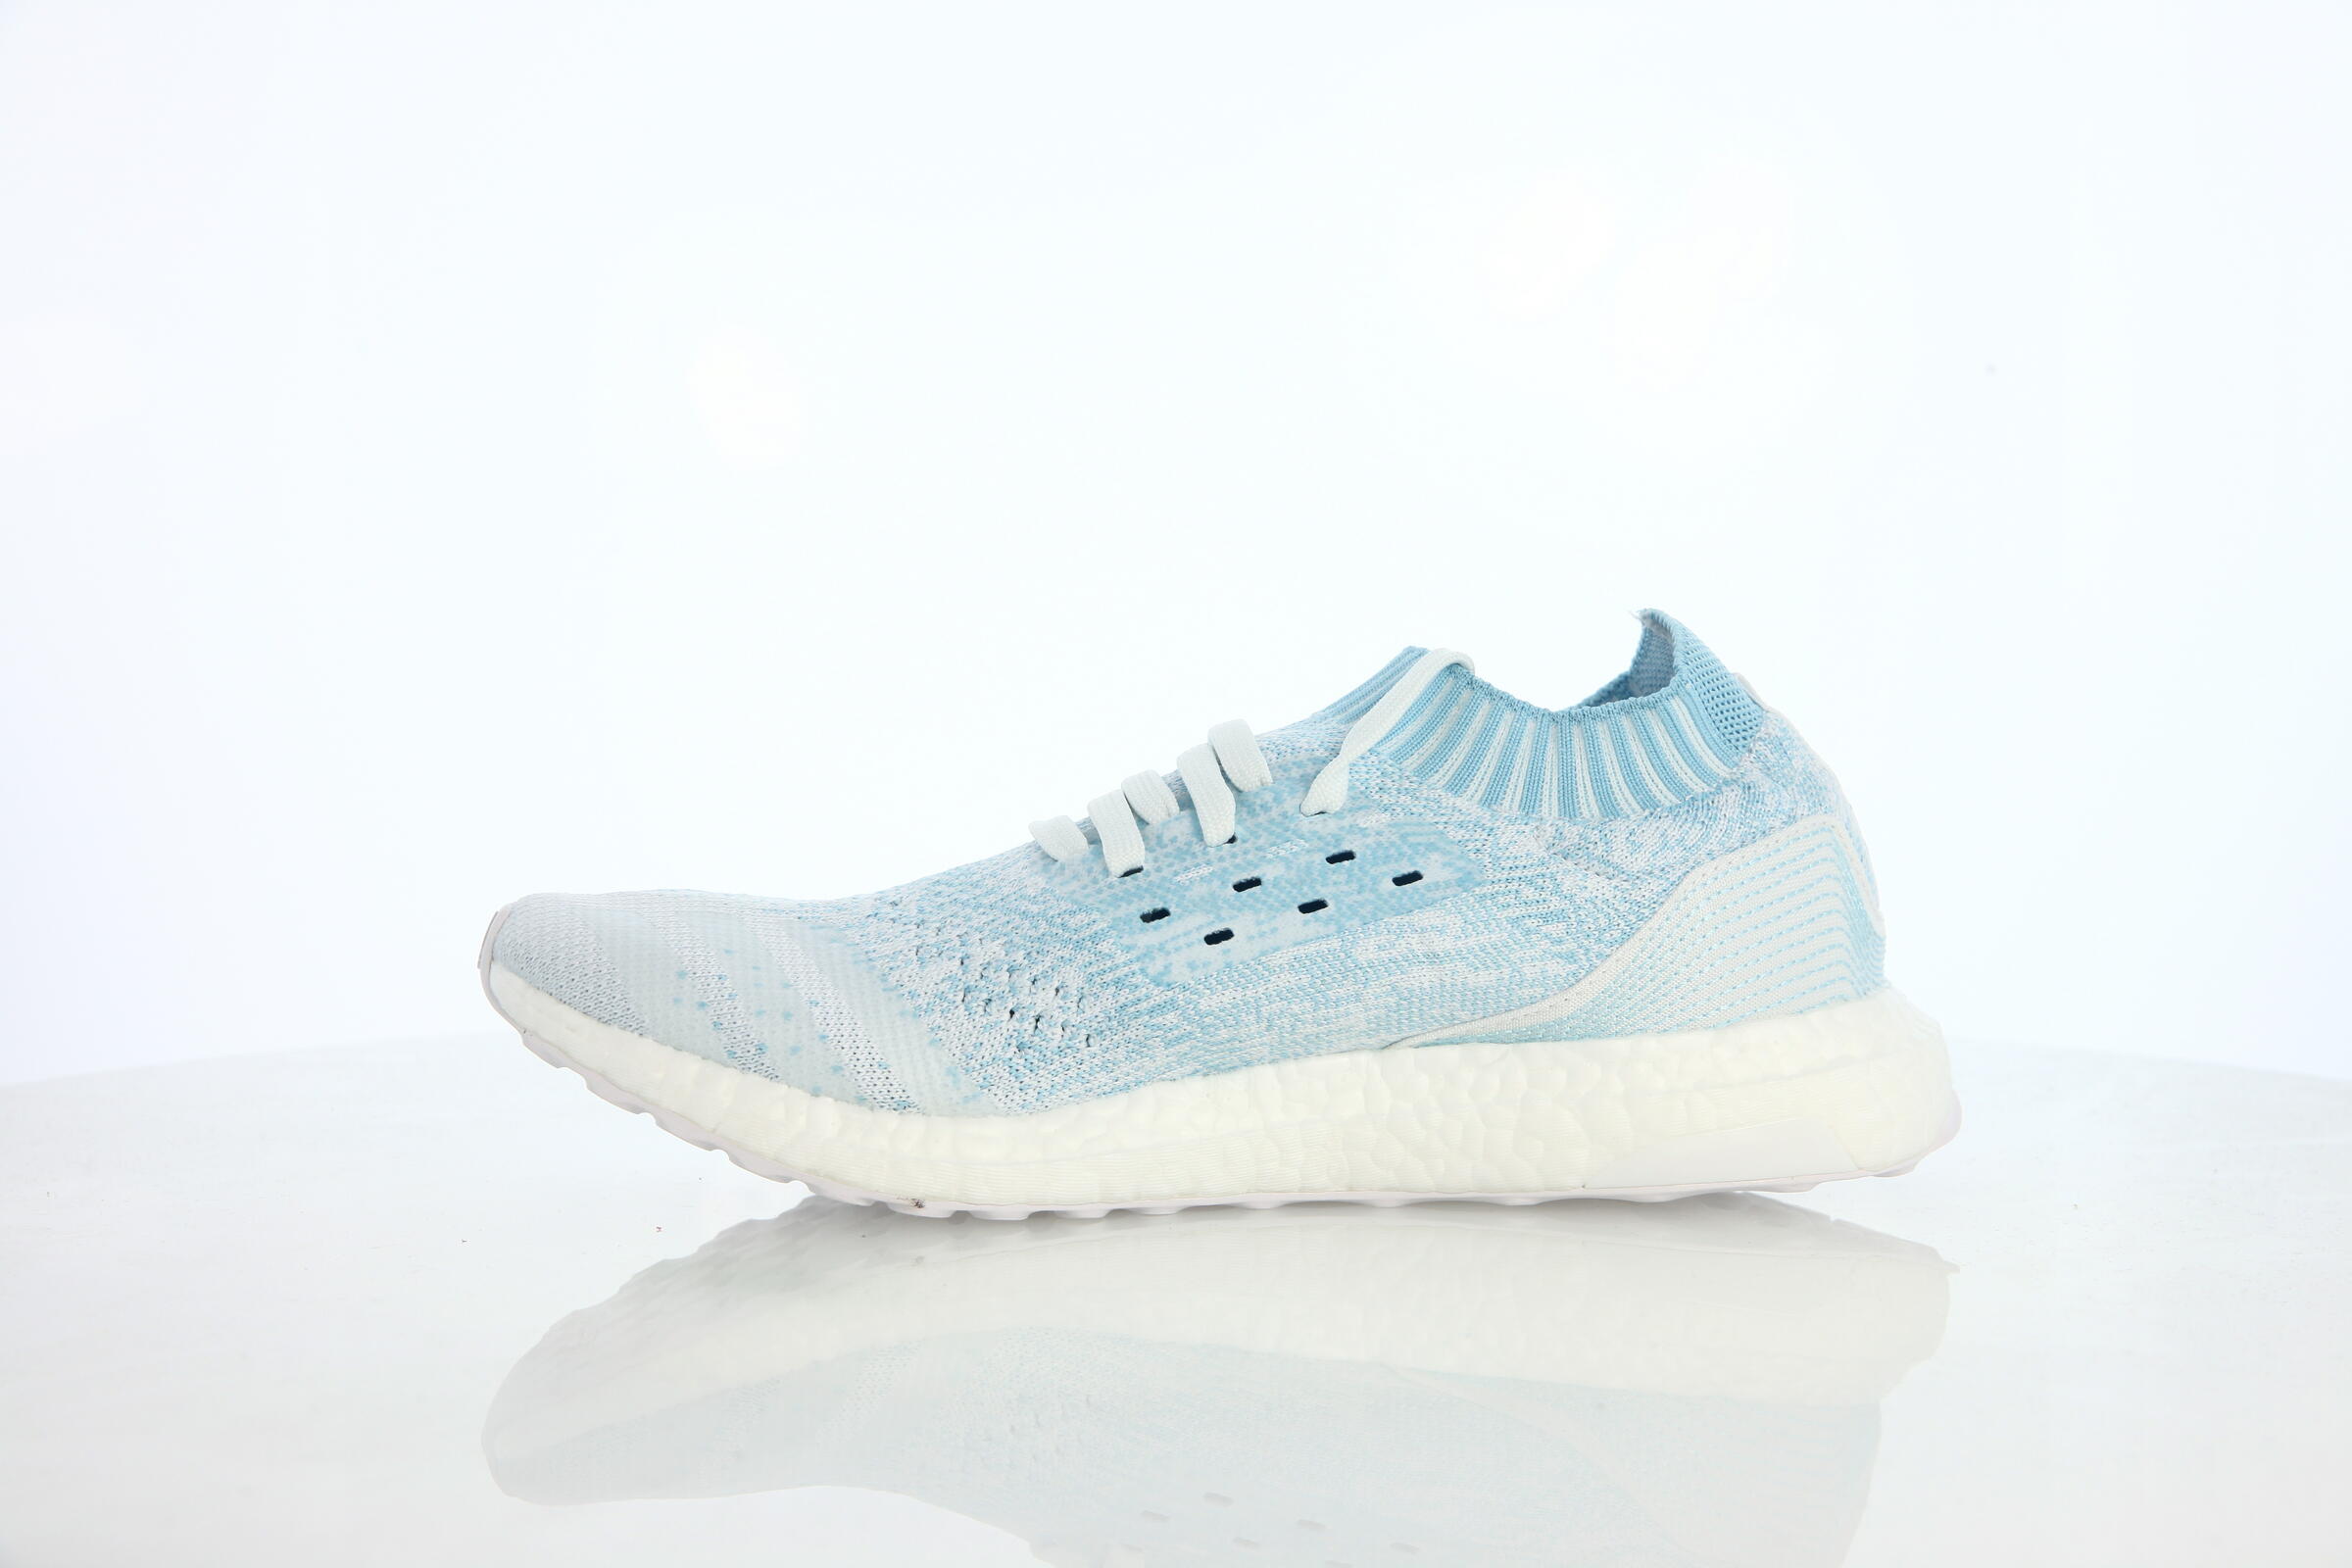 adidas Performance Ultraboost Uncaged x Parley